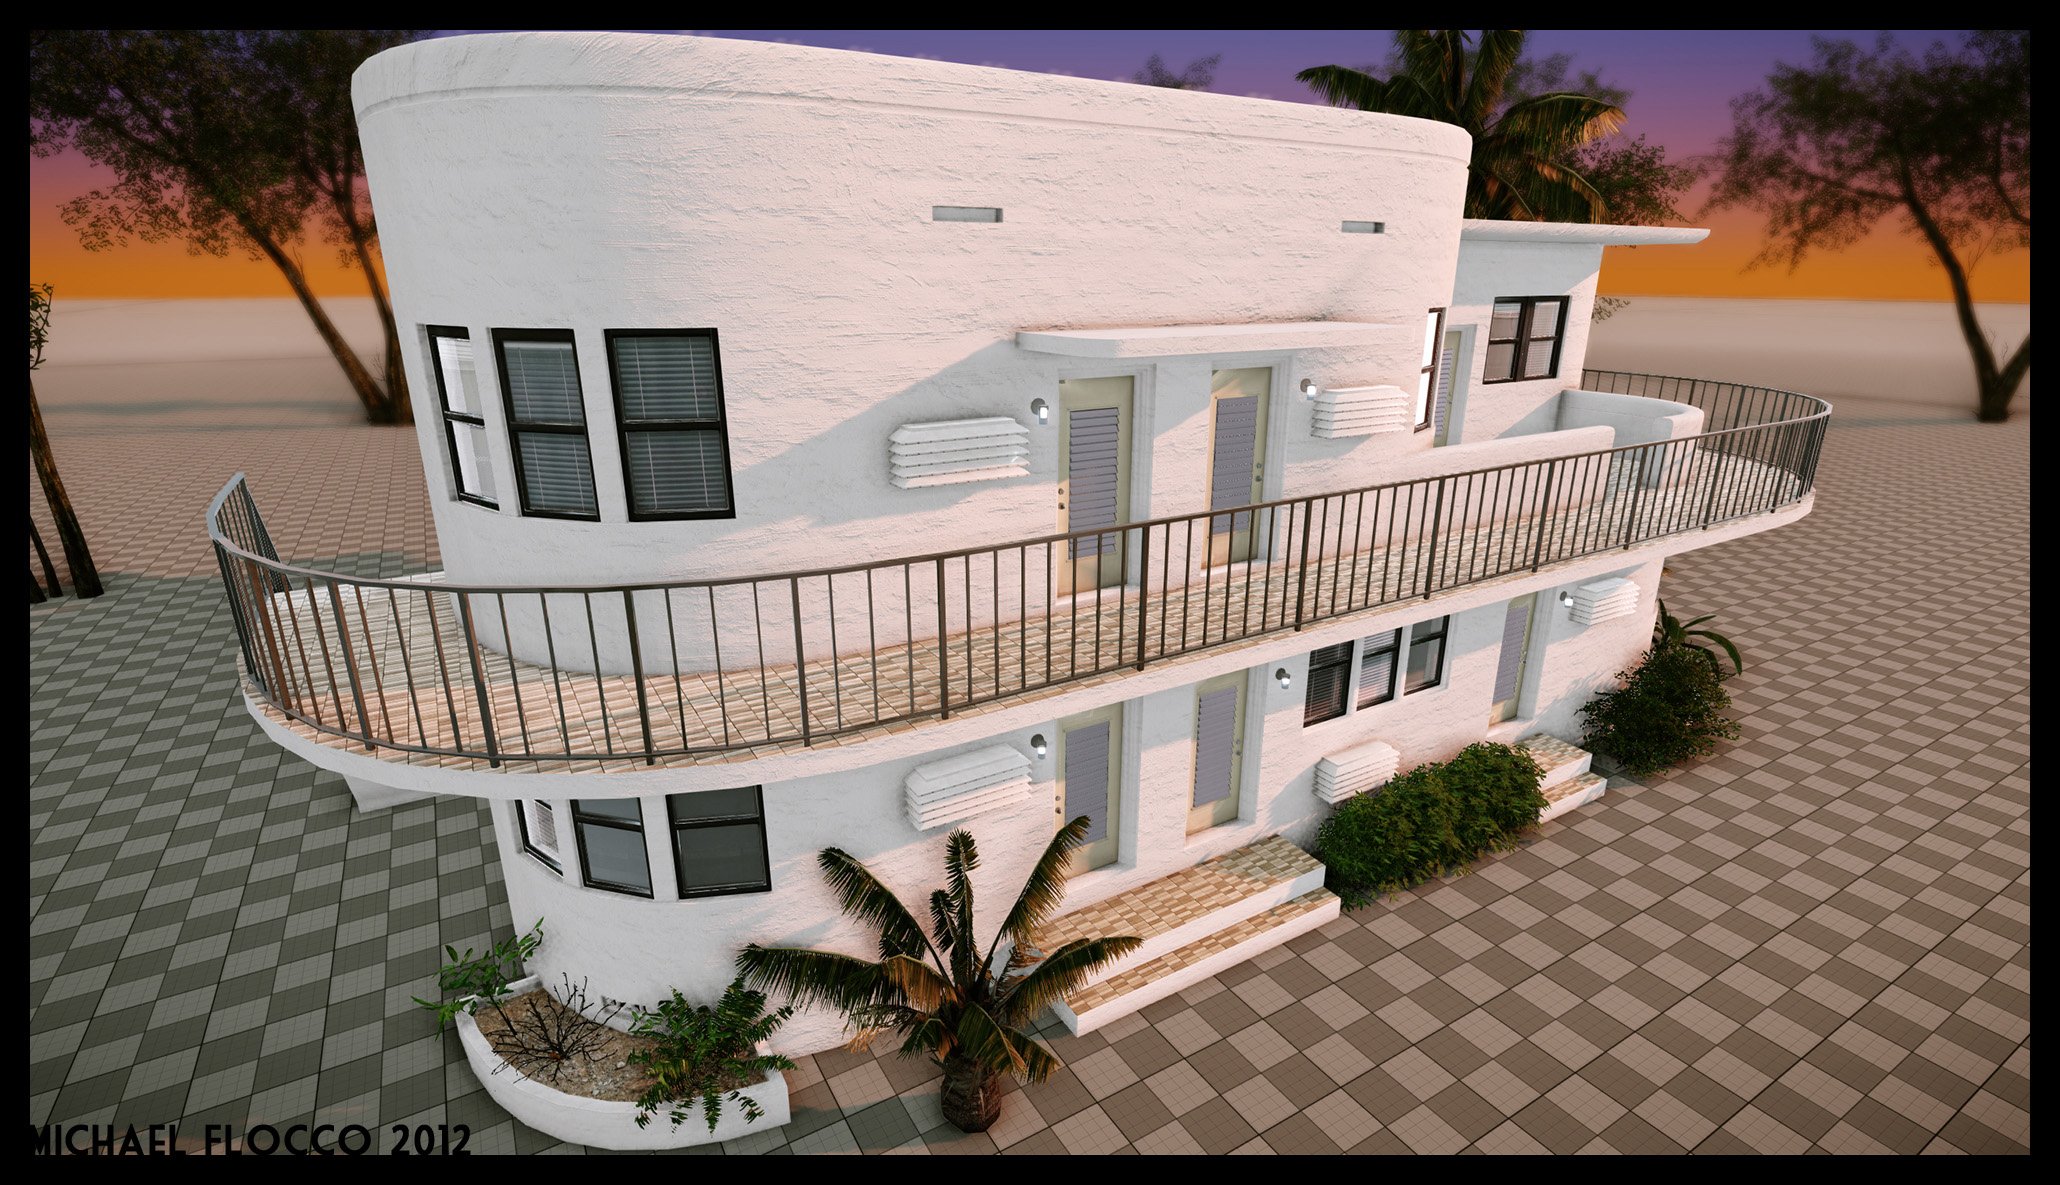  Fittings Club Tags 3d Art Deco How Are Art Deco Homes Design Like 2060x1185